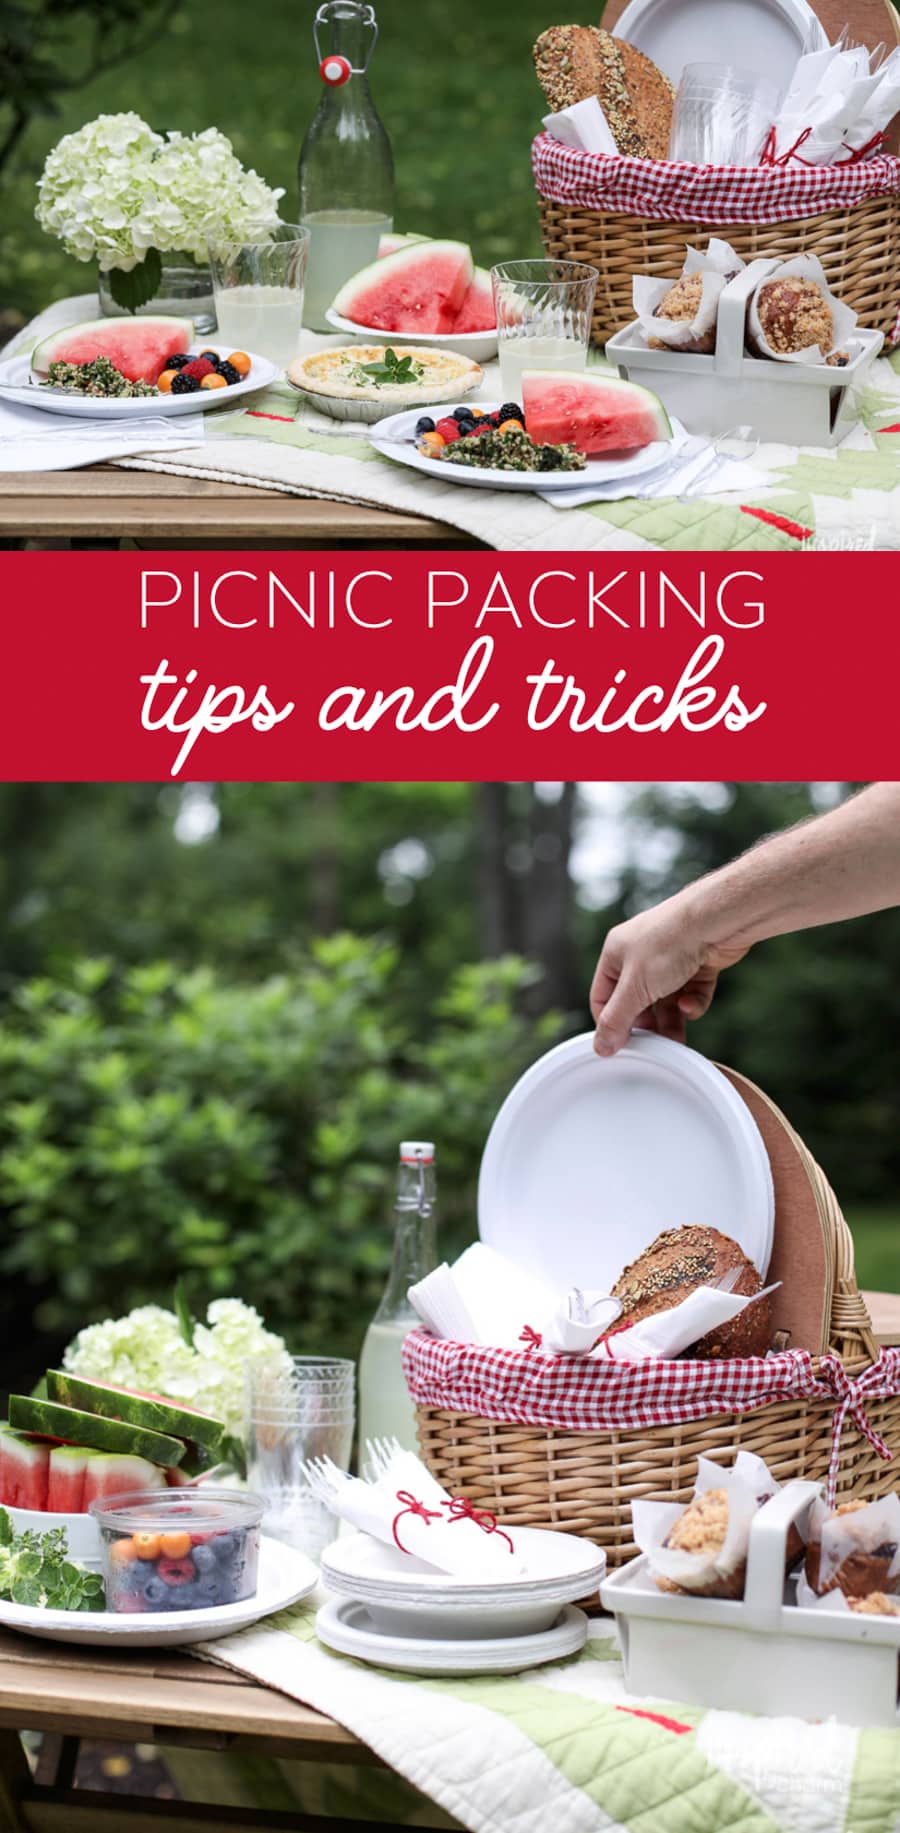 Tips, Tricks, and Ideas for Packing the Perfect Picnic | #picnic #food #ideas #recipes #styling